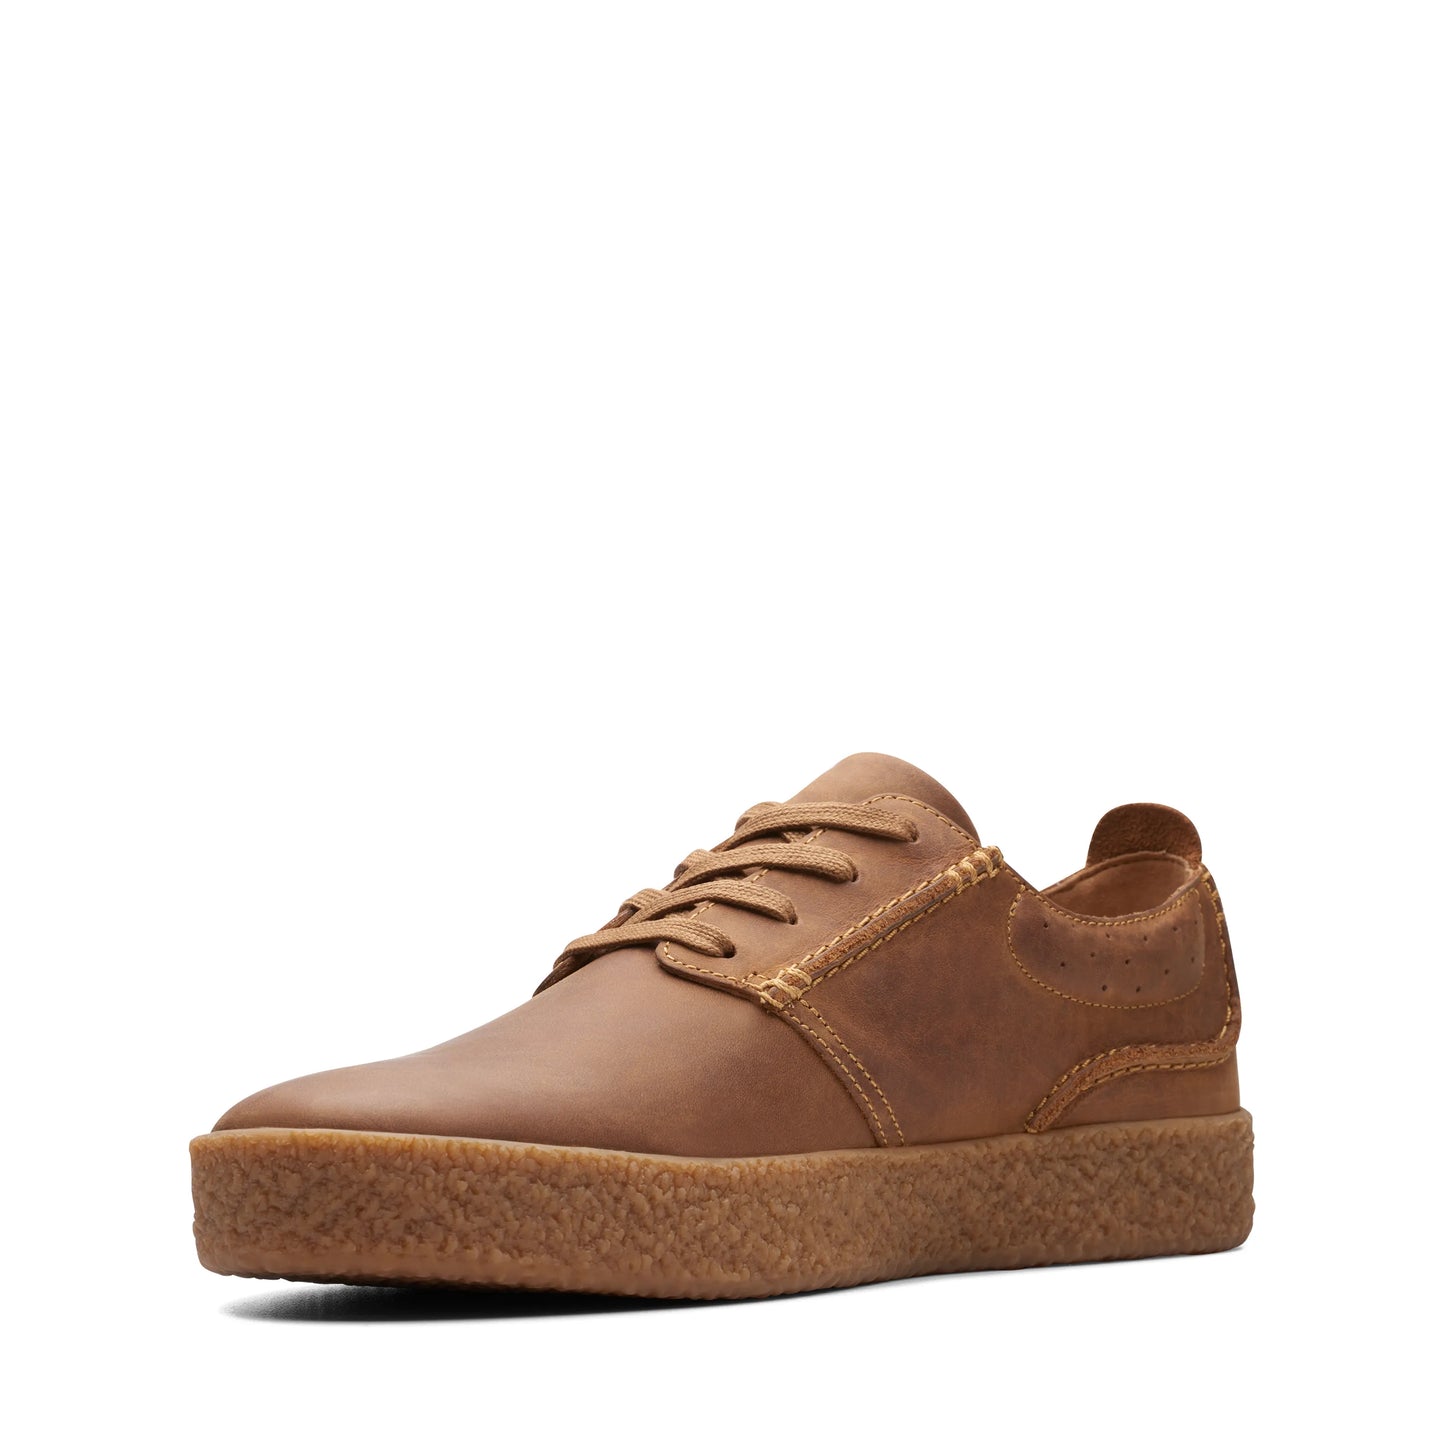 CLARKS | CHAUSSURES DE DERBY MASCULINES | STREETHILL LACE DARK TAN LEATHER | BRUN